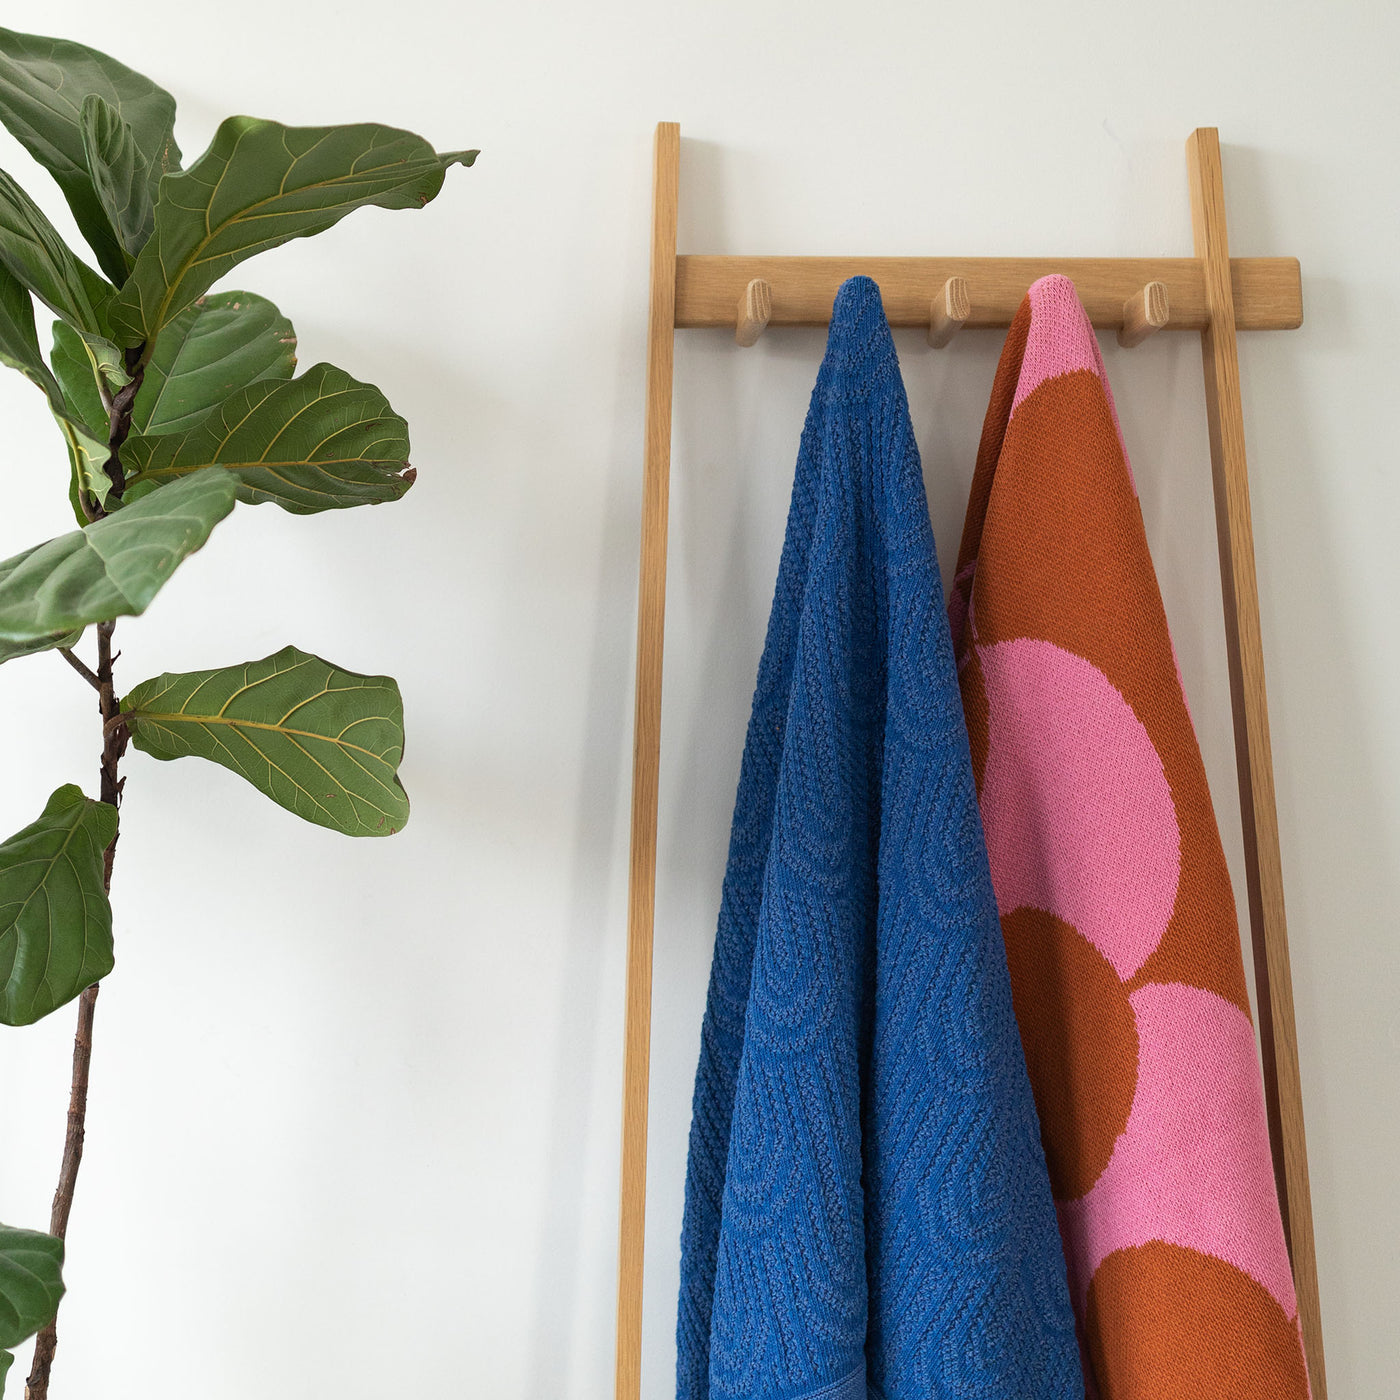 Blue and Pink Throw Blankets on a Coat Rack